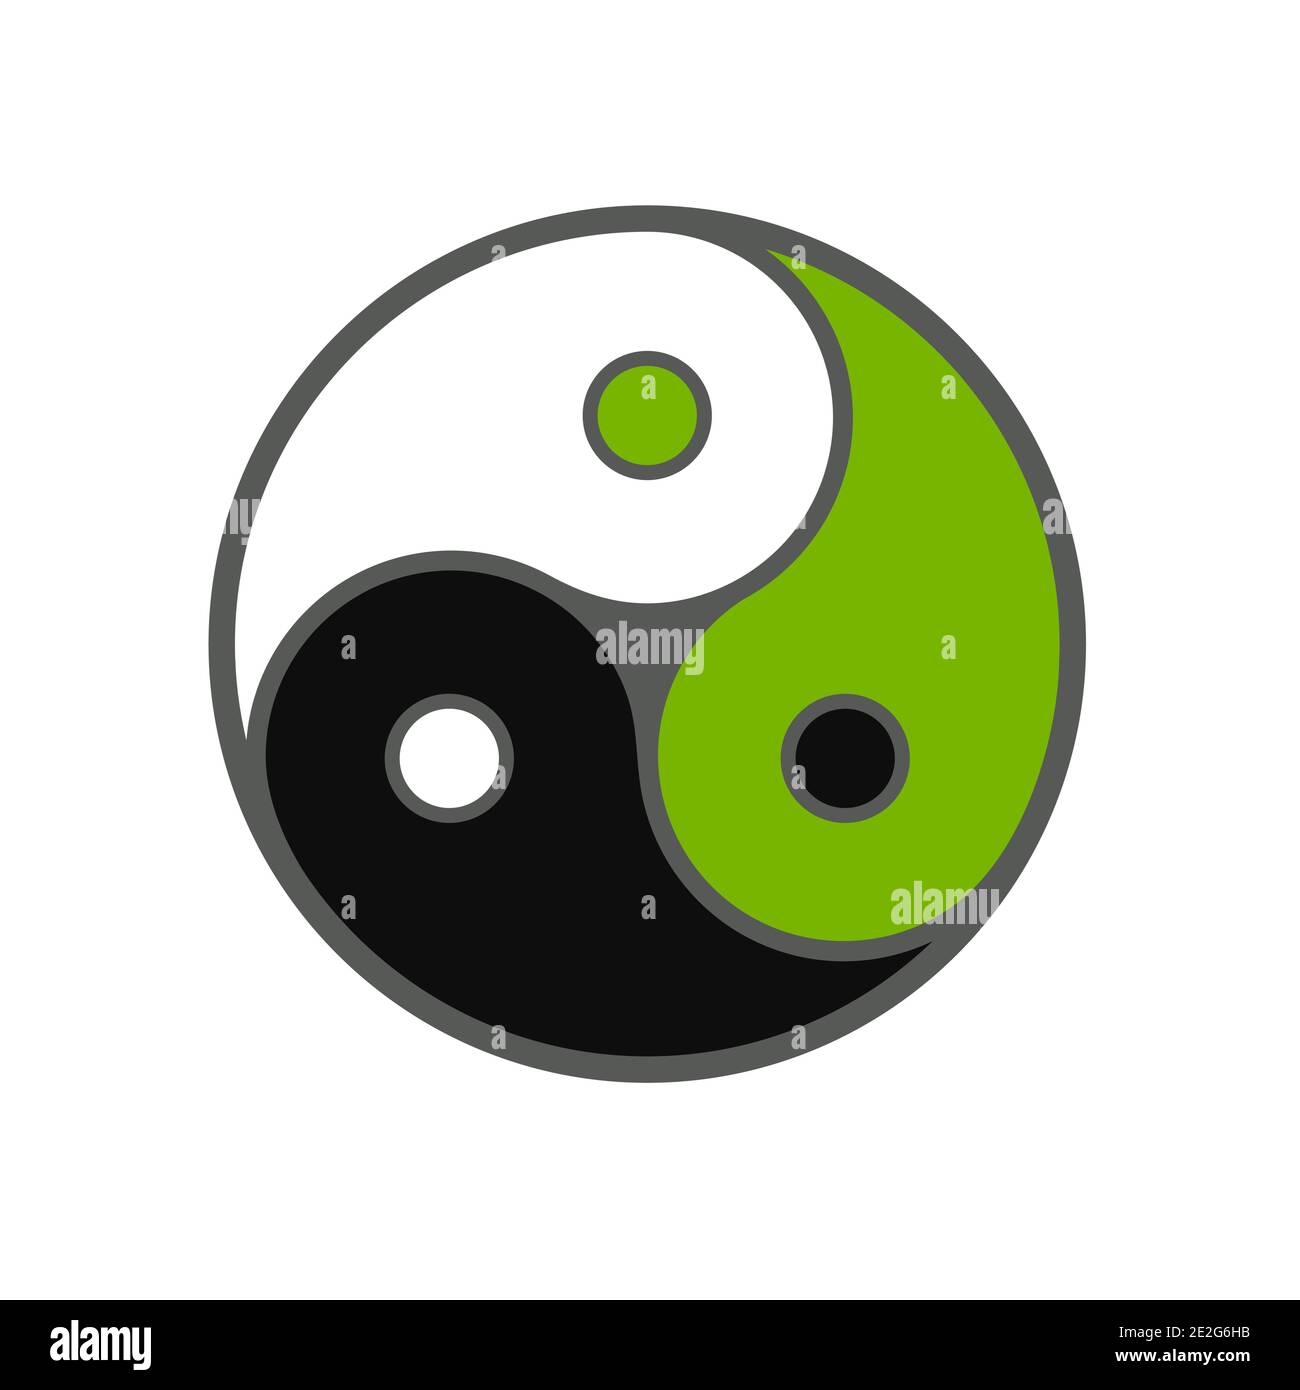 Triple yin yang symbol, three colors in balance. White, black and green. Vector clip art illustration on white background. Stock Vector